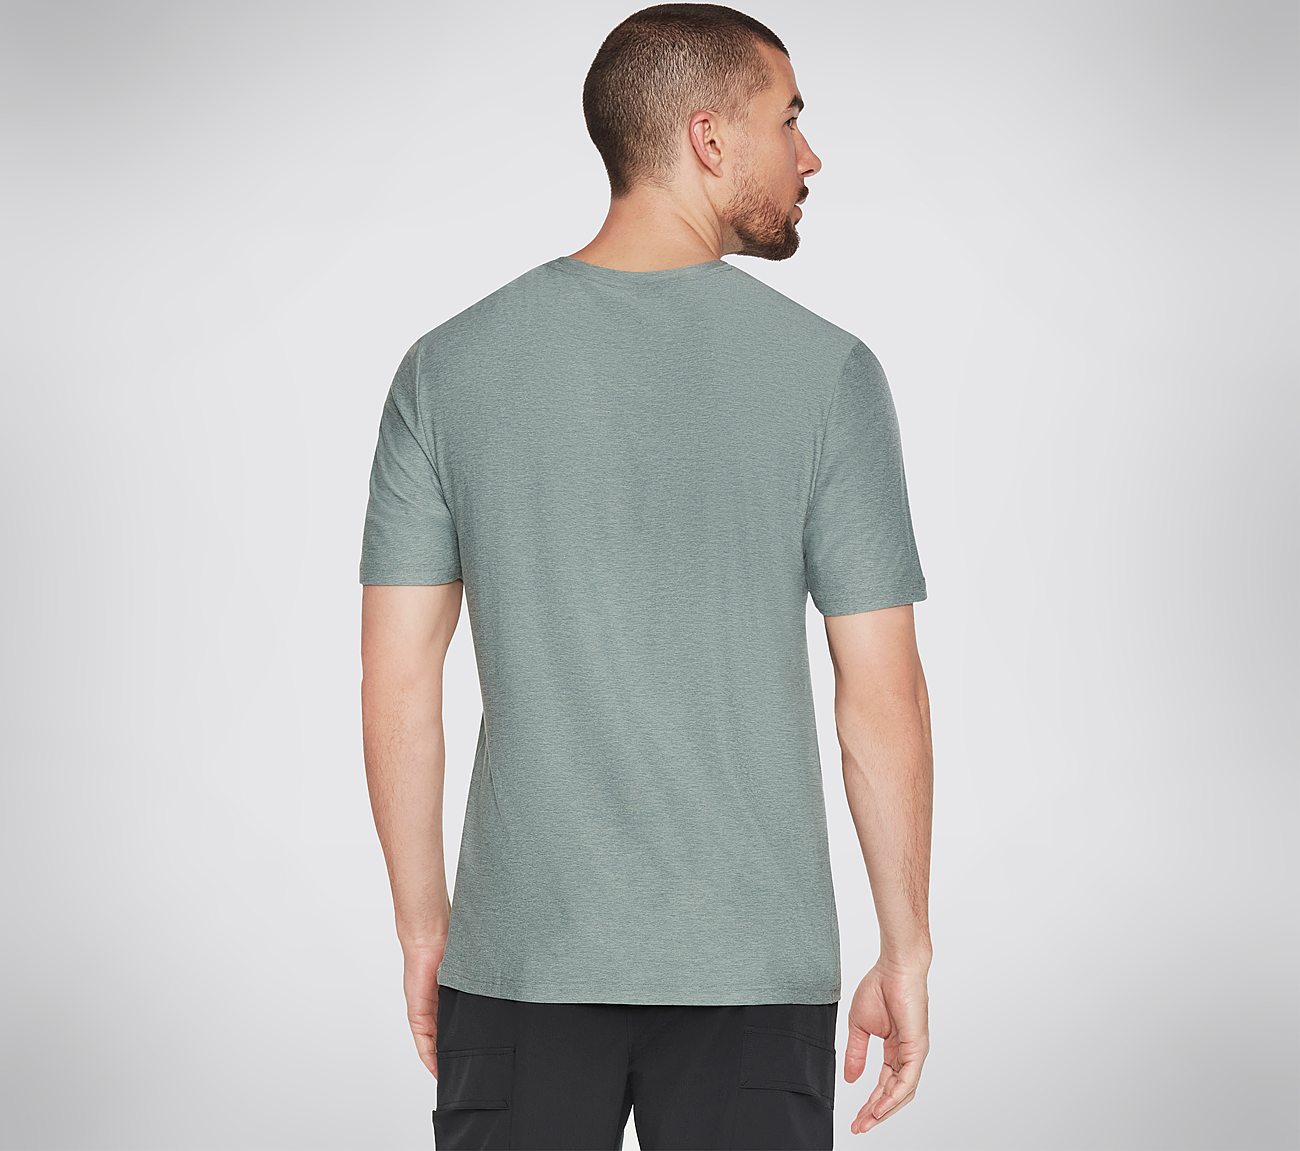 GODRI ALL DAY TEE, TEAL/BLUE Apparels Top View